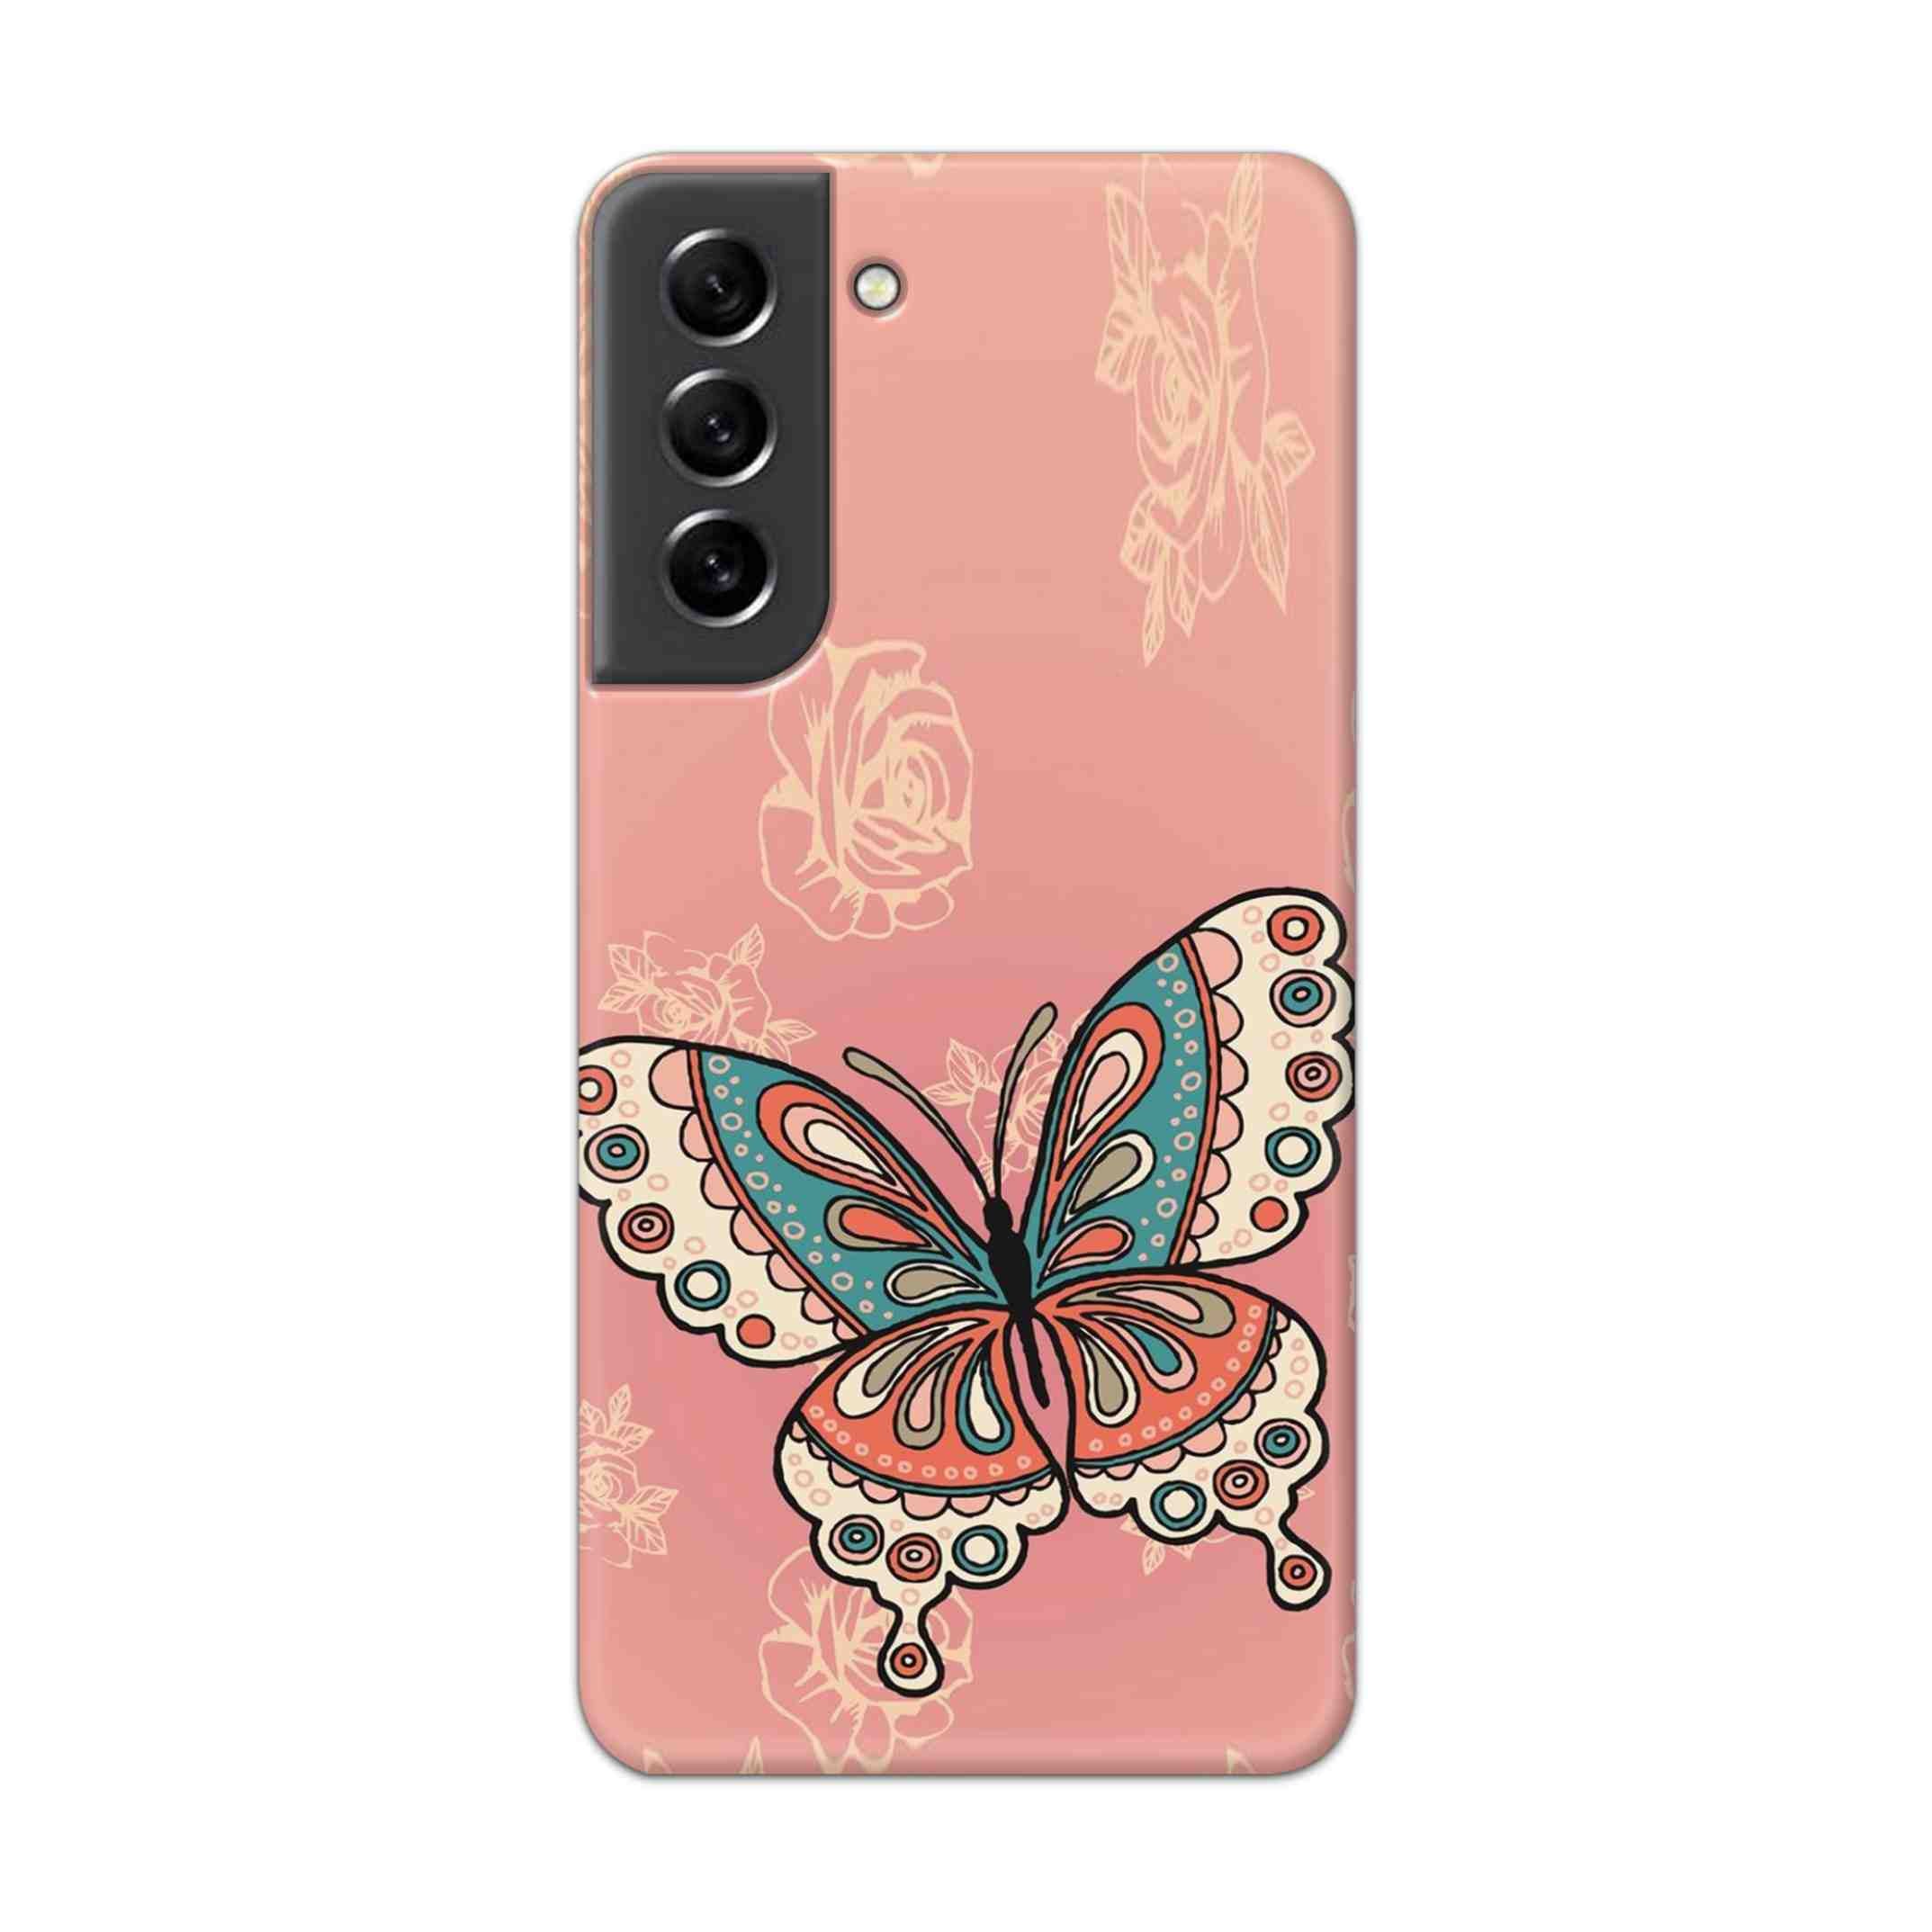 Buy Butterfly Hard Back Mobile Phone Case Cover For Samsung S21 FE Online